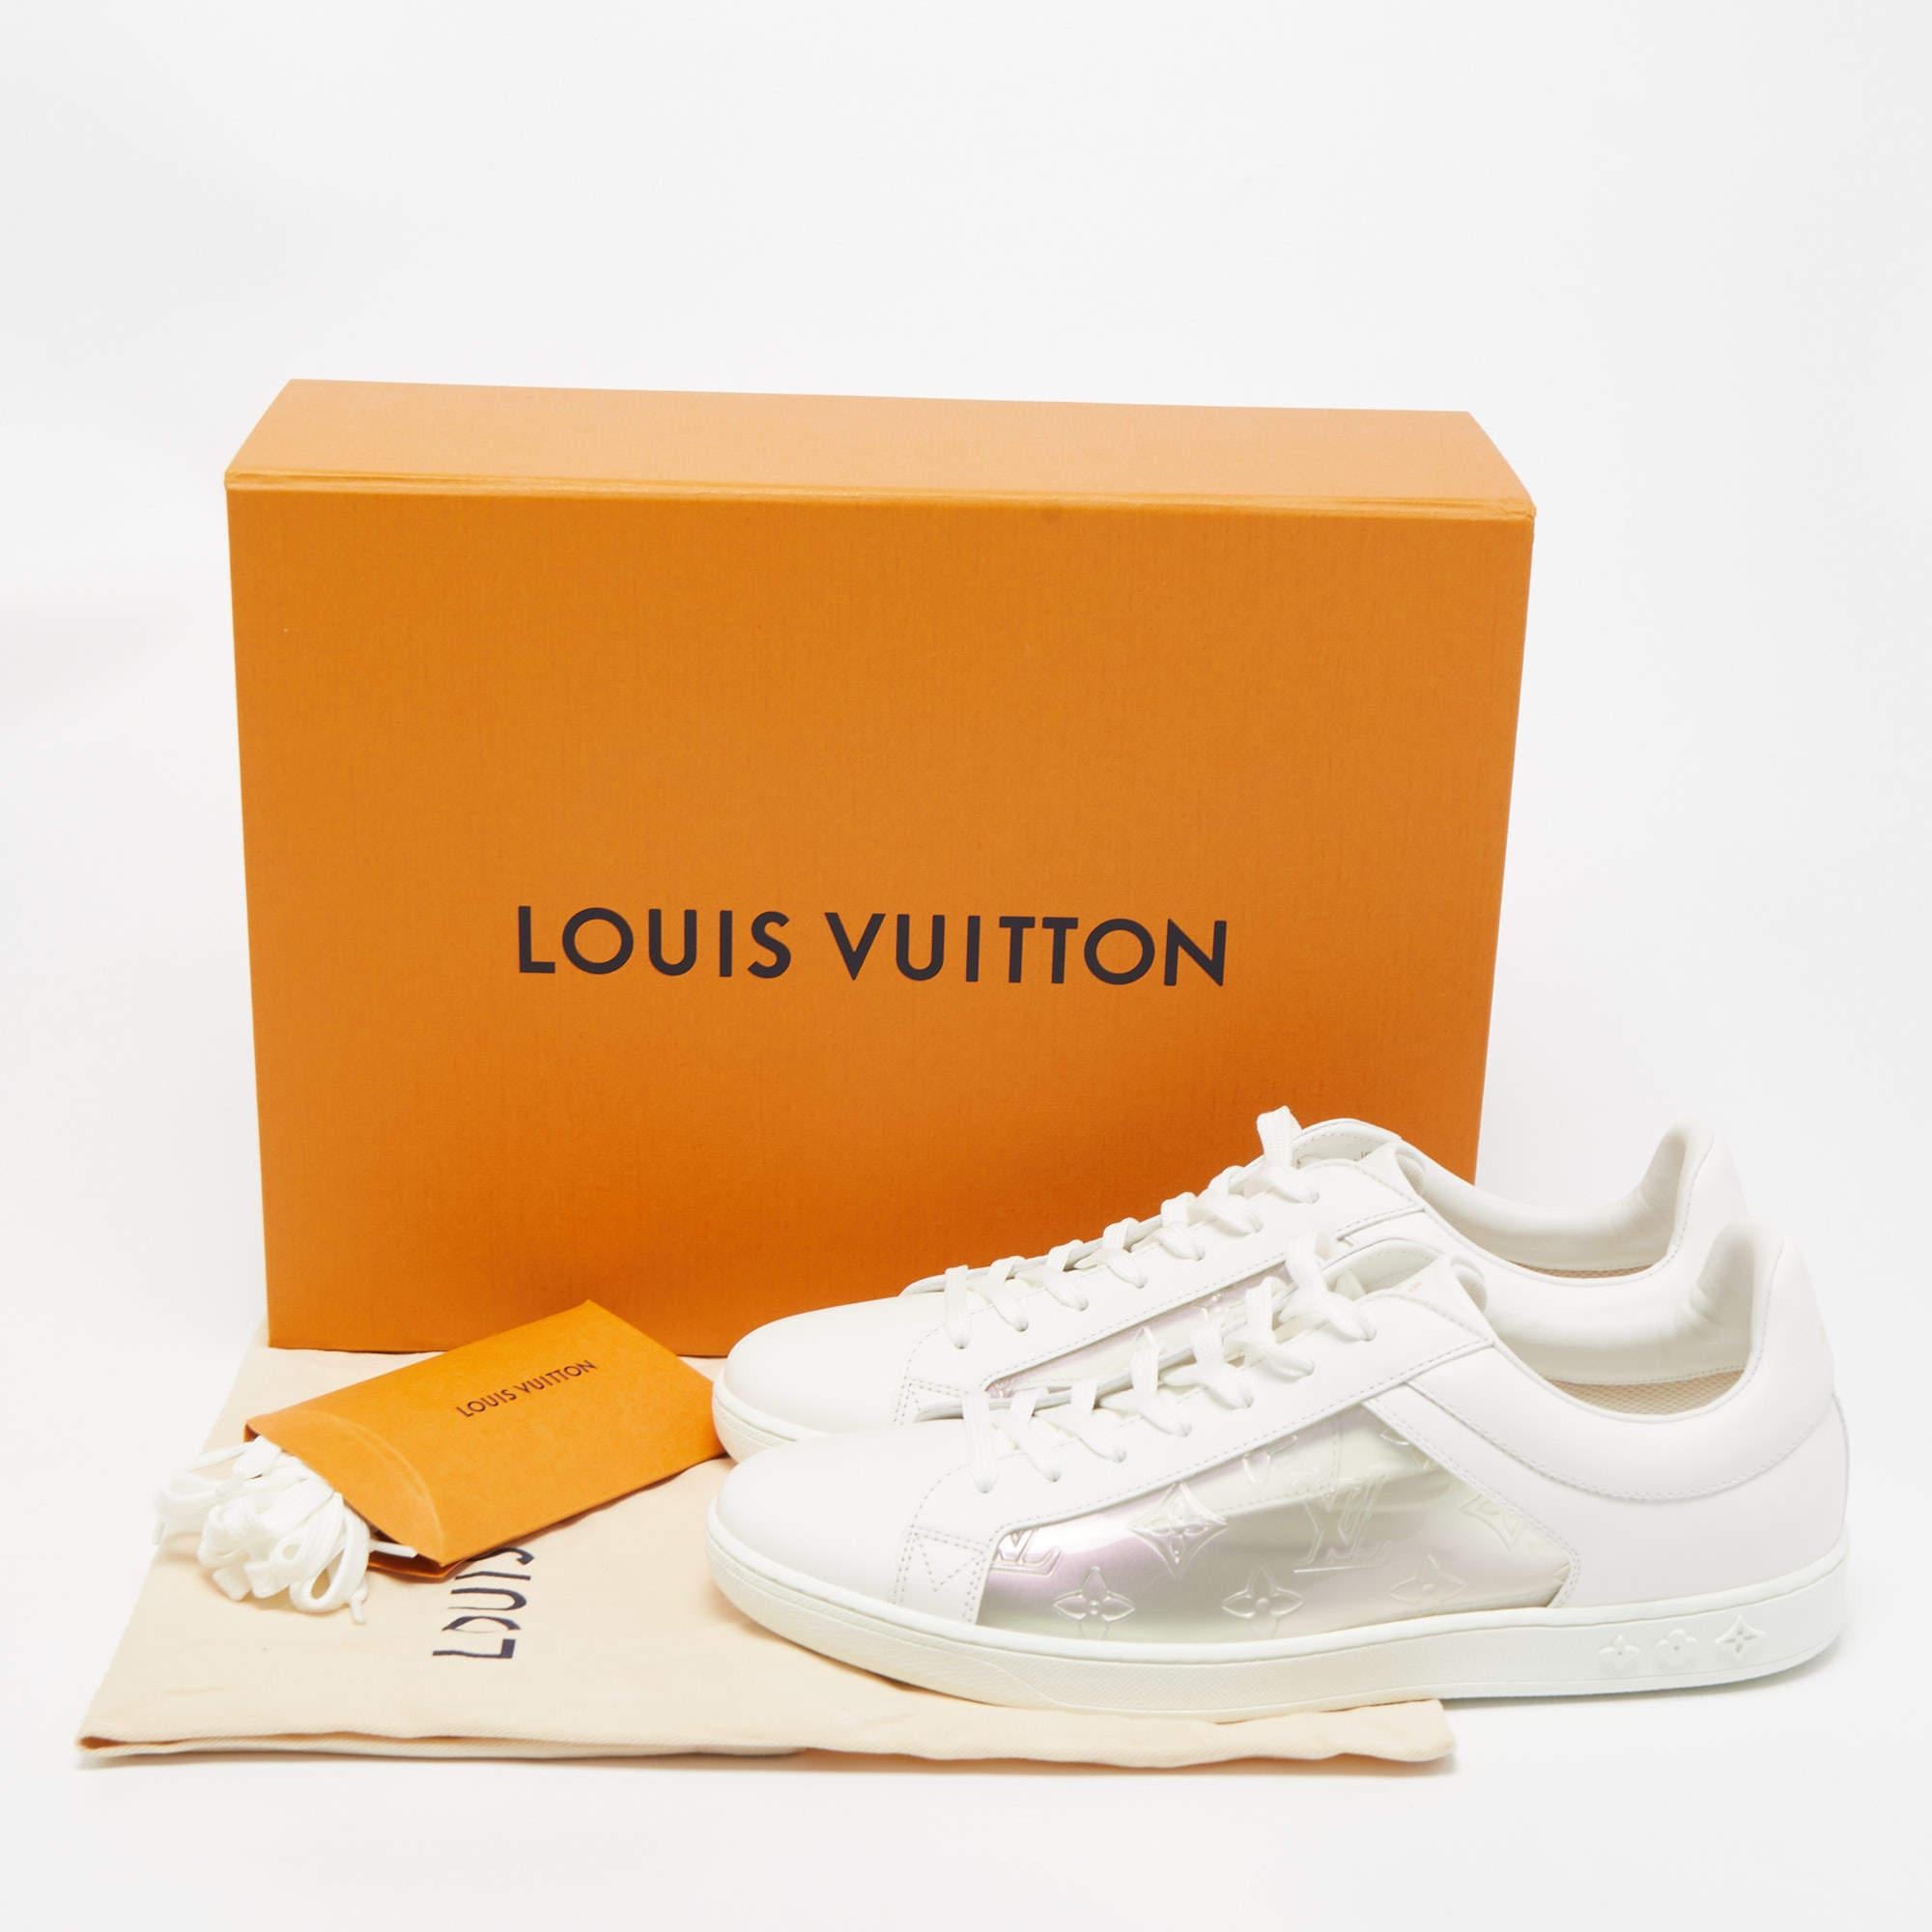 Louis Vuitton White/Transparent PVC and Leather Low Top Sneakers Size 41.5 5